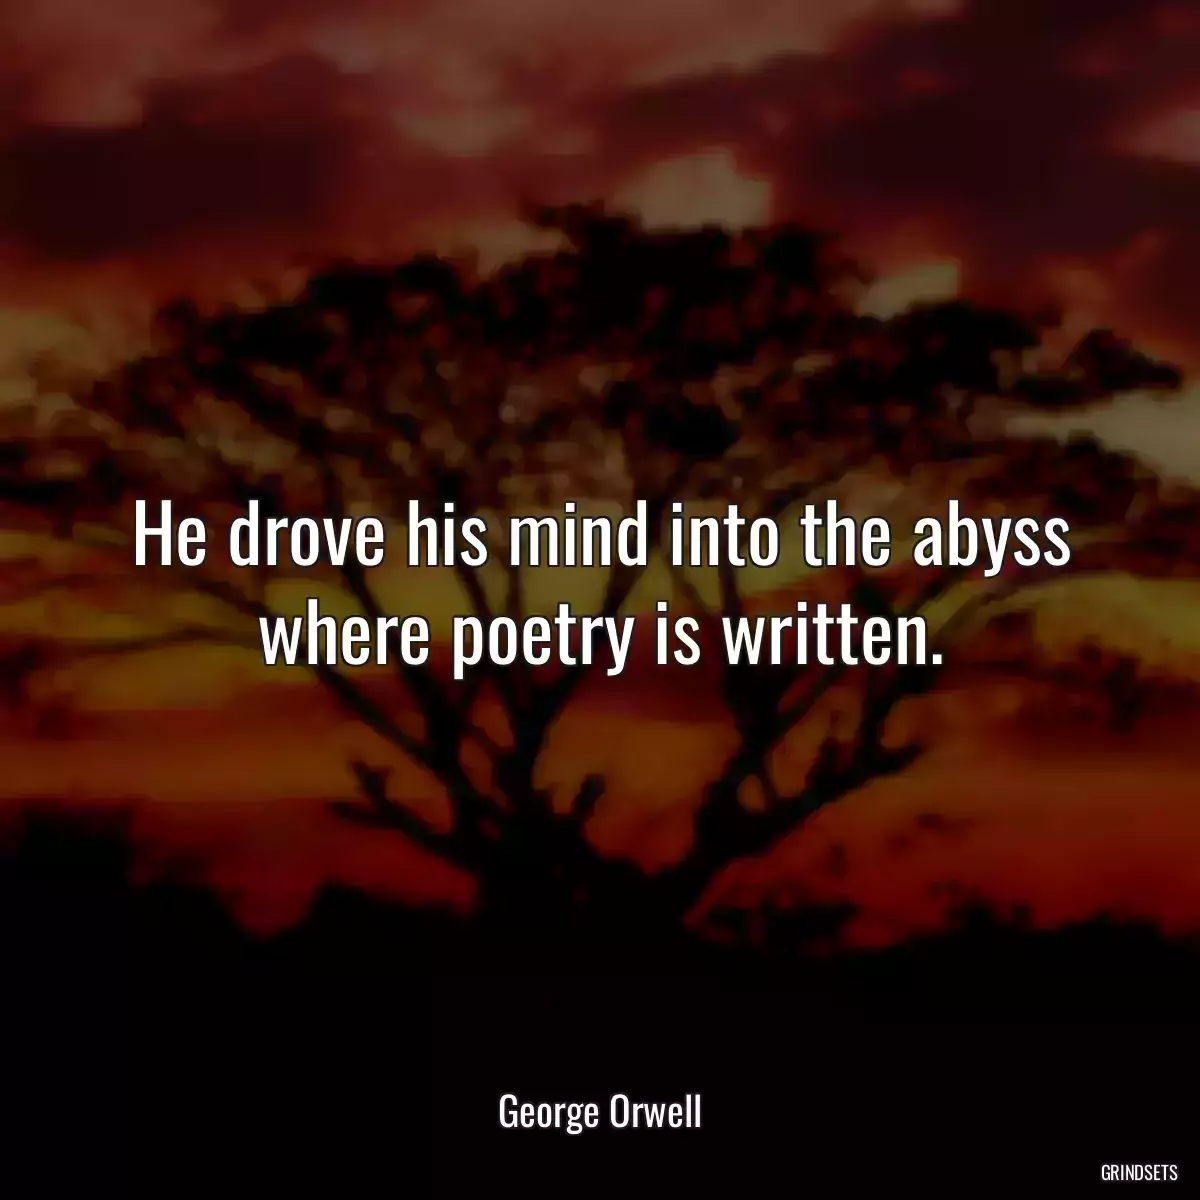 He drove his mind into the abyss where poetry is written.